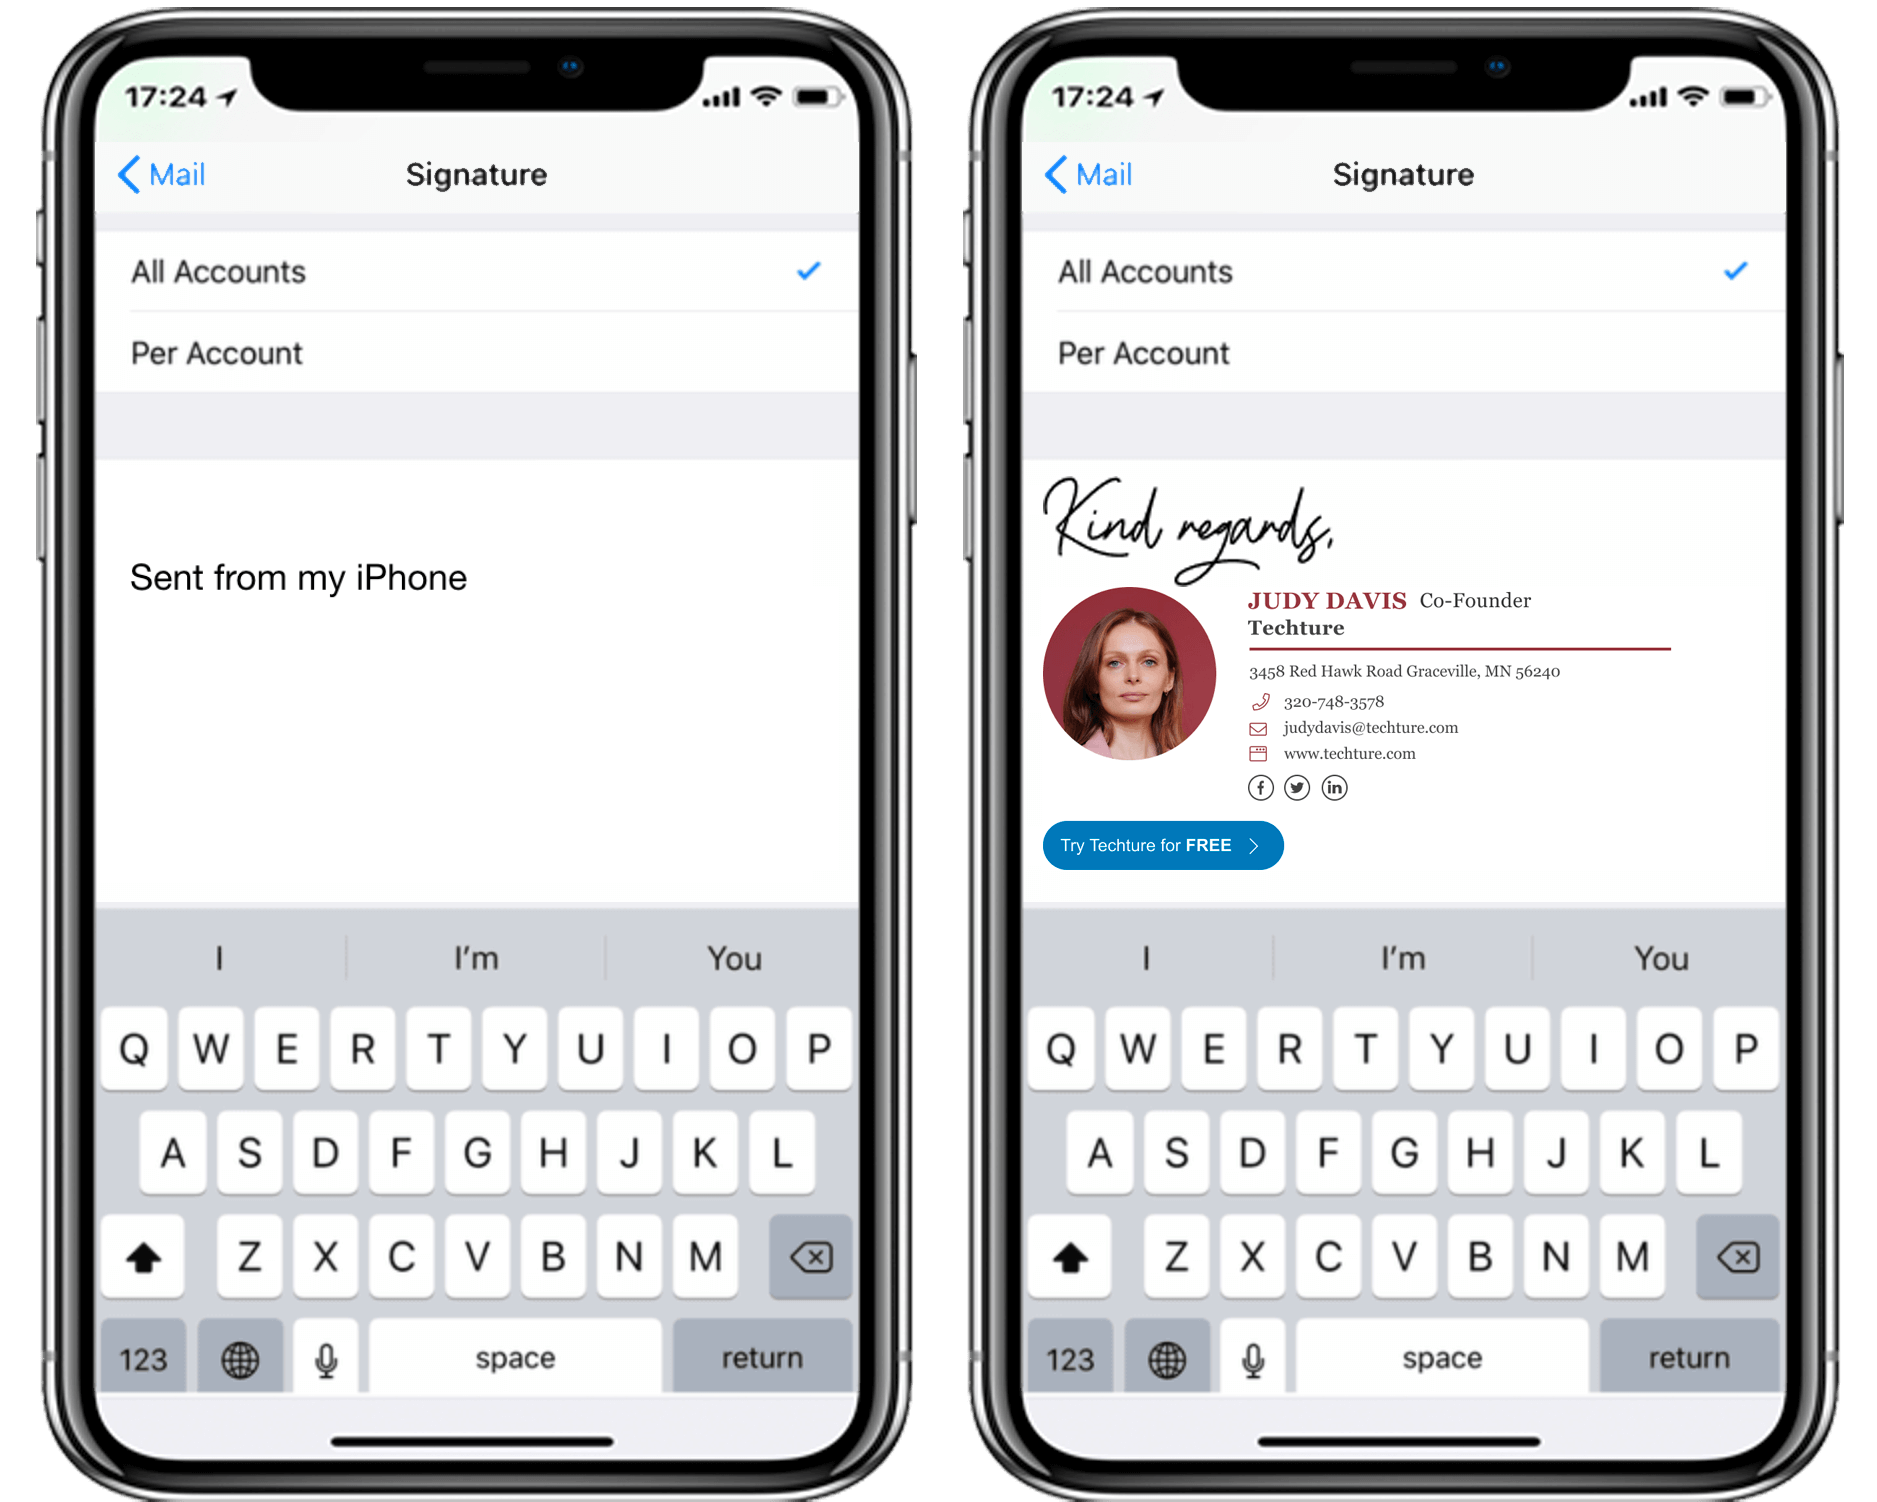 how to add email signature on iphone - step 4 - add HTML signature on iphone signature editor copy